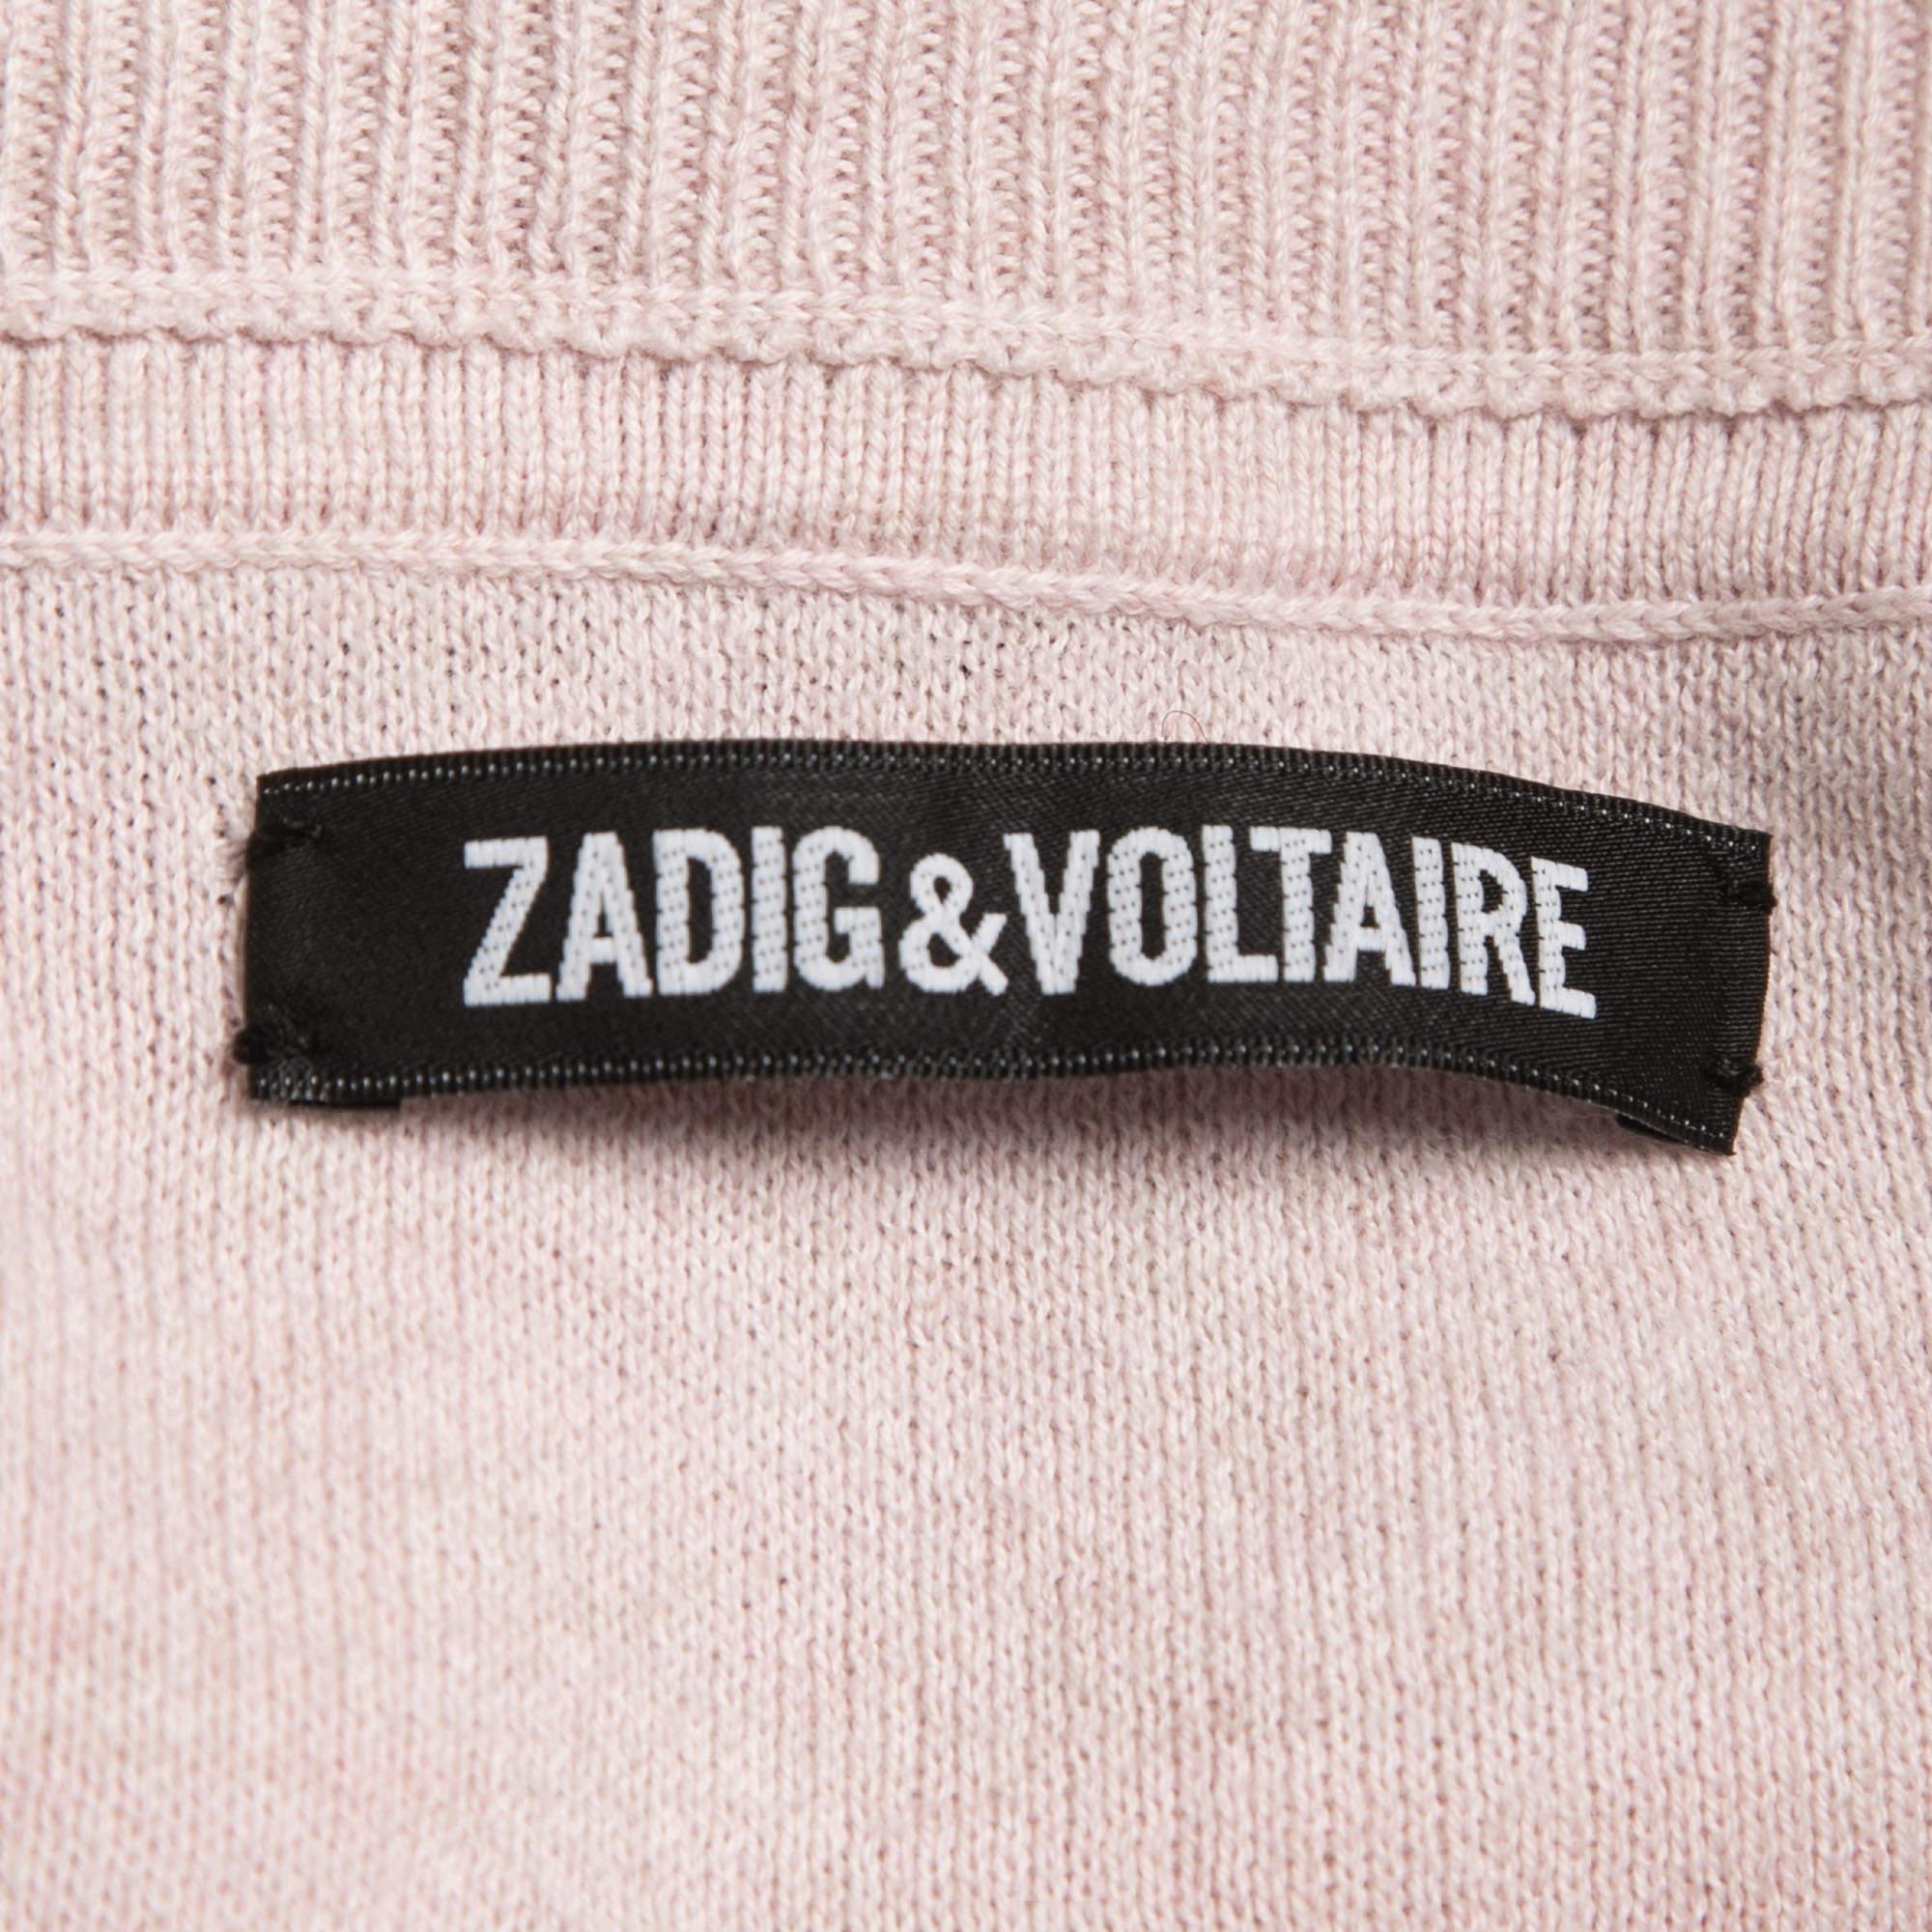 Men's Zadig & Voltaire Pink/Blue Ombre Knit Kennedy Sweater L